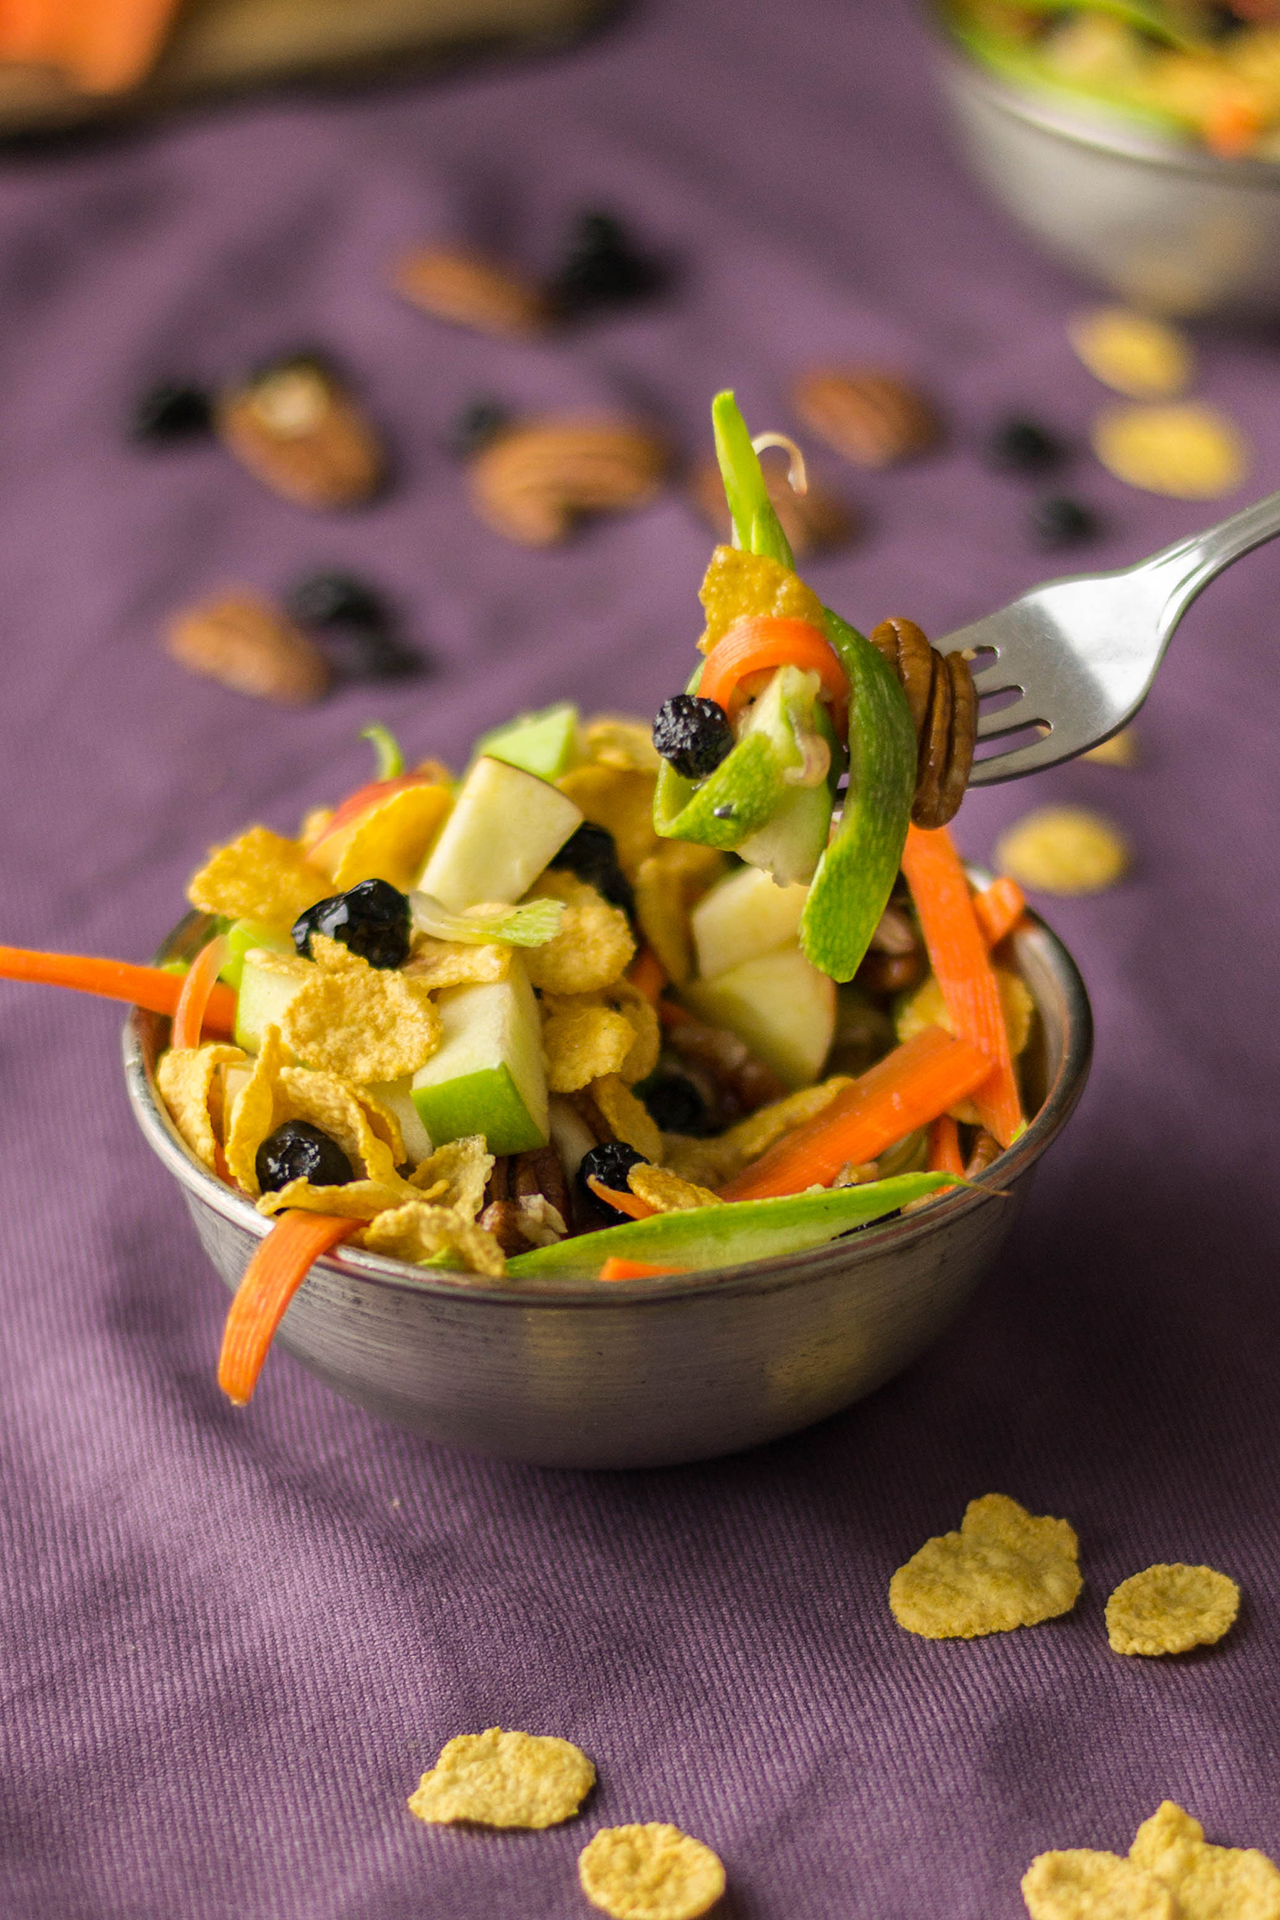 Vegetable and fruit salad with corn flakes. No sugar, no salt: the tastiest and healthiest dieting formula to lose weight.